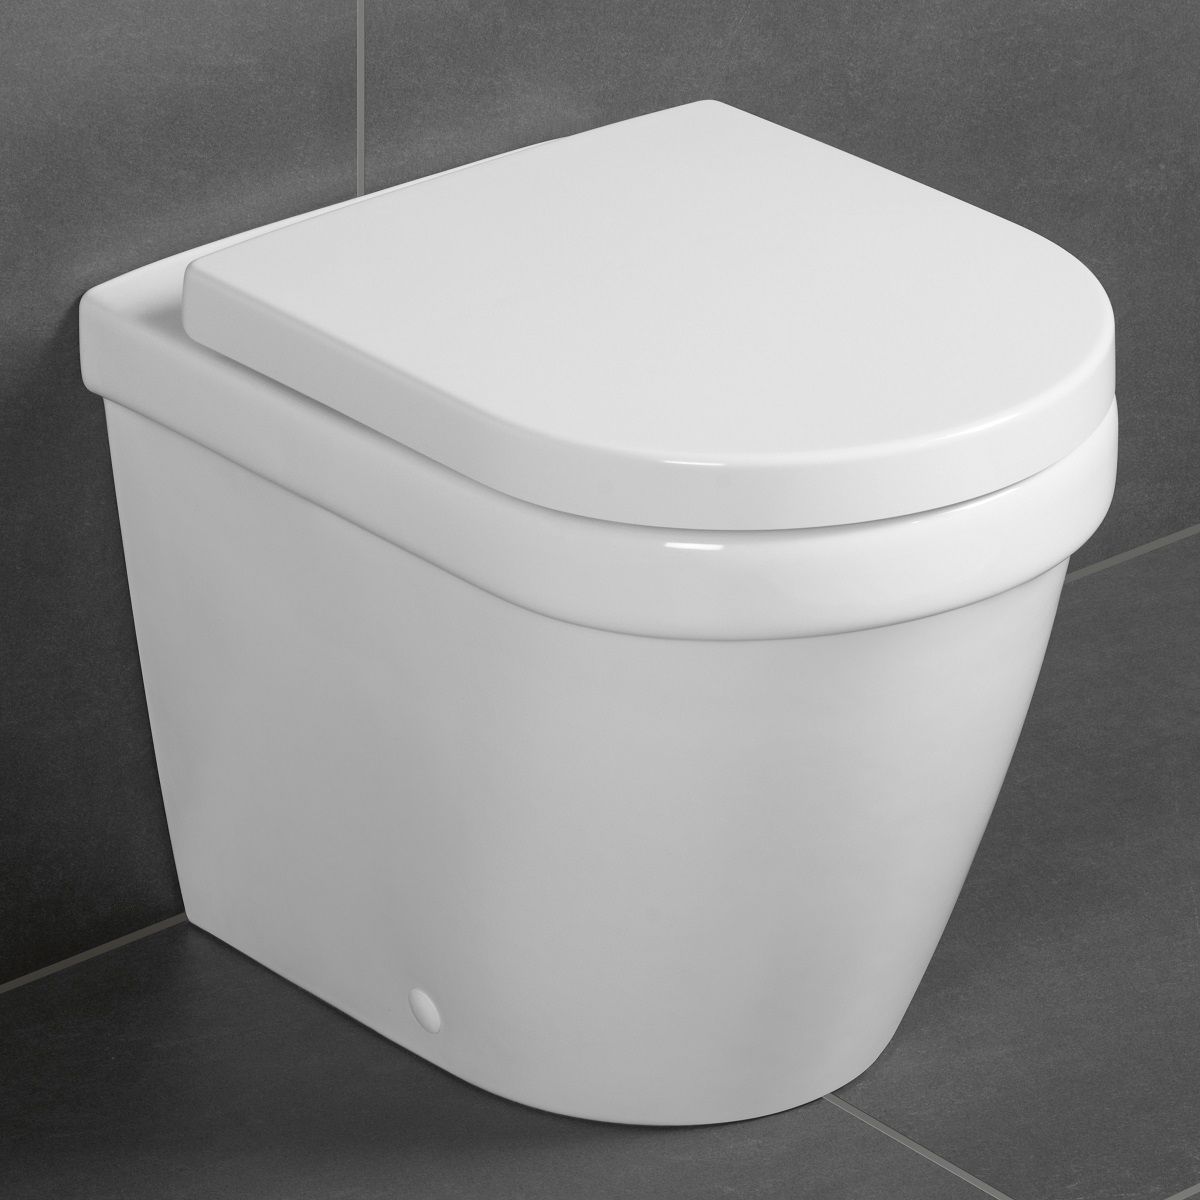 Villeroy and Boch Architectura Floorstanding Rimless WC - 5690R001